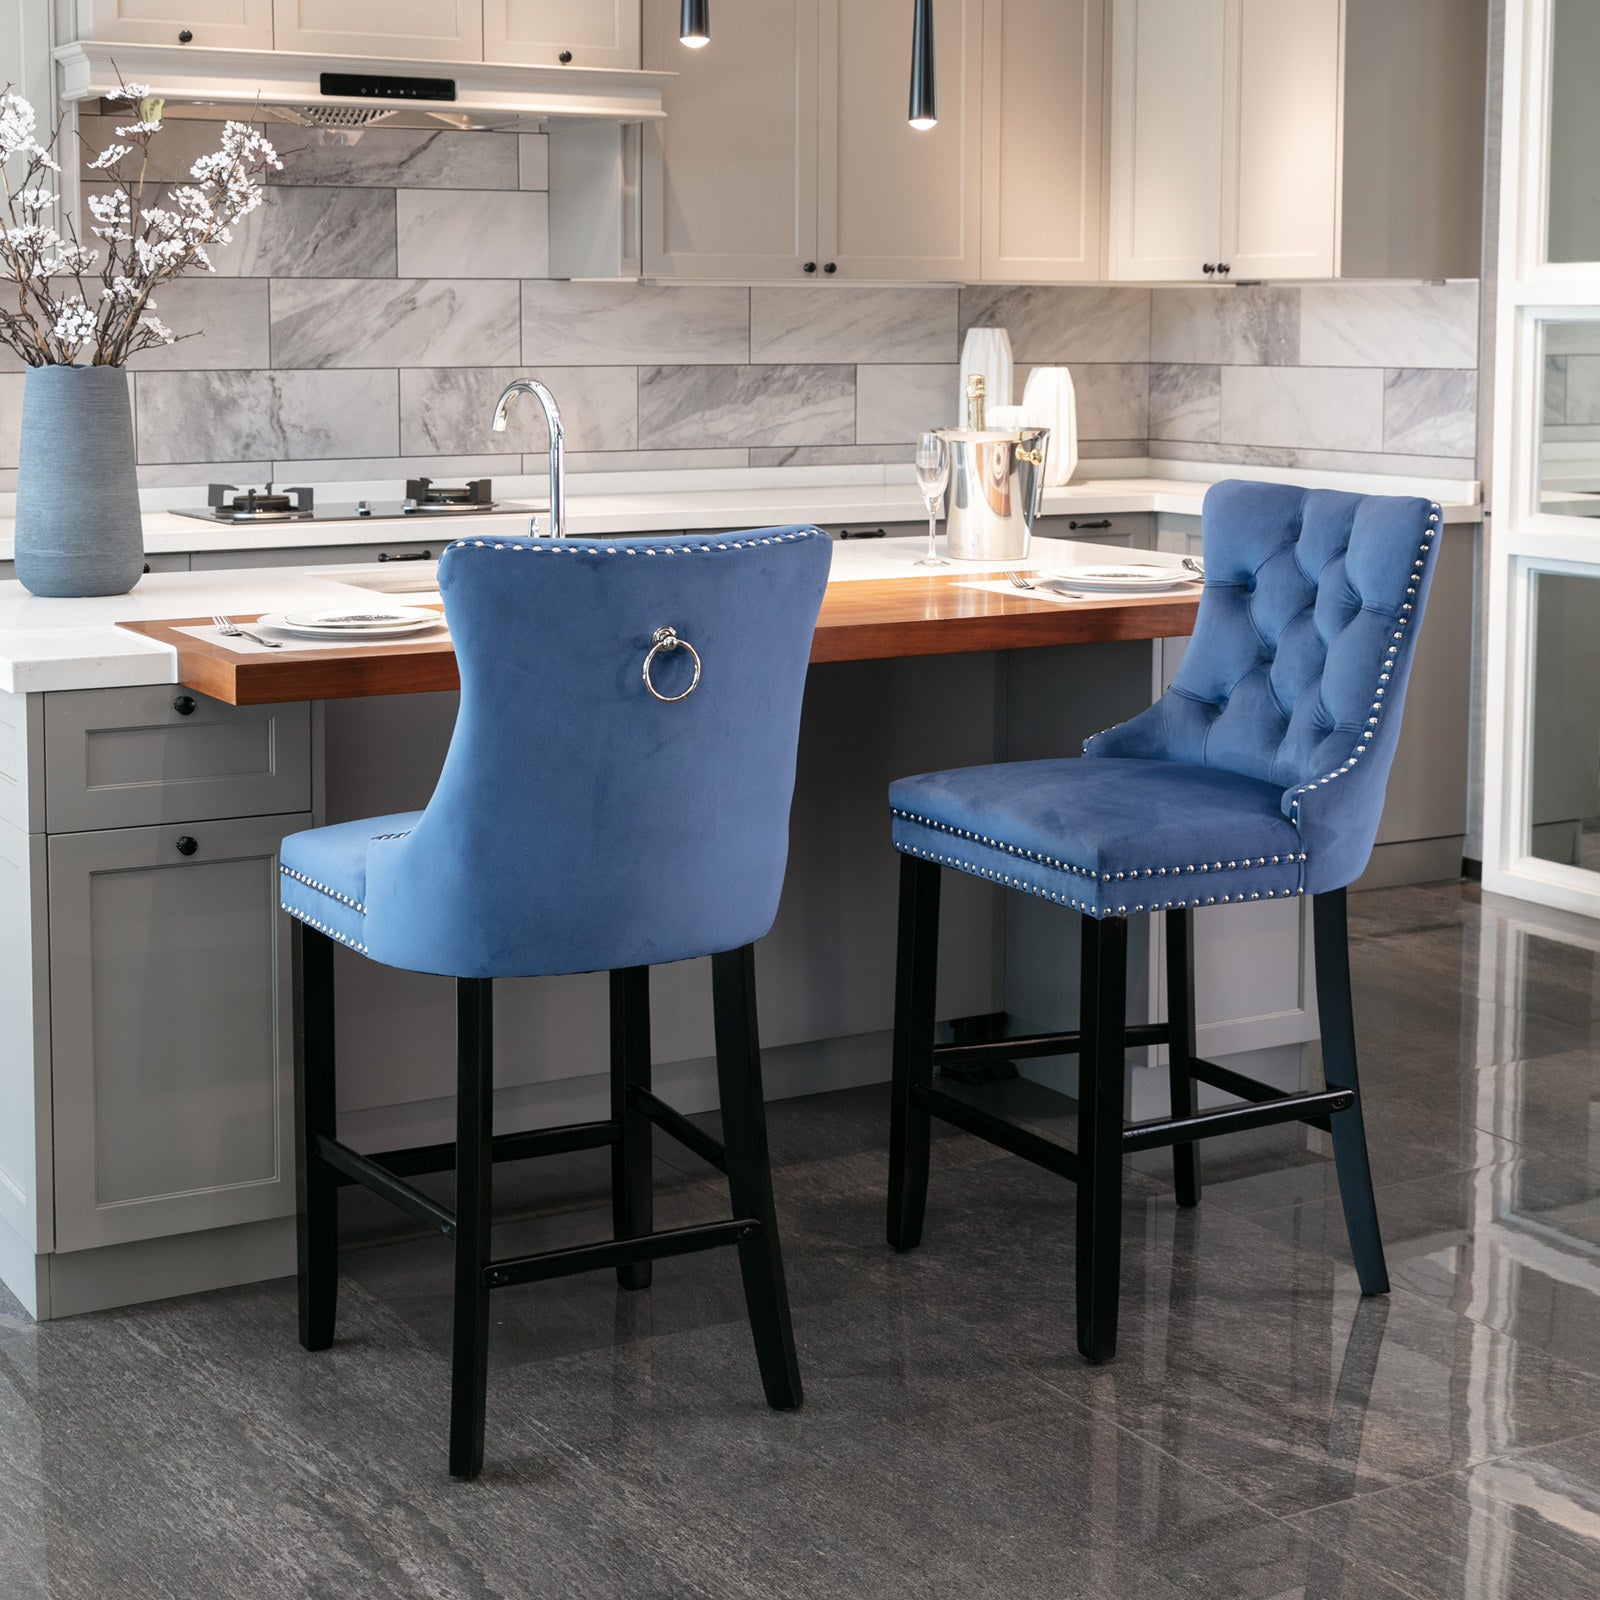 A&A Furniture,Contemporary Velvet Upholstered Barstools with Button Tufted Decoration and Wooden Legs, and Chrome Nailhead Trim, Leisure Style Bar Chairs,Bar stools, Set of 2 (Blue) 1902BL